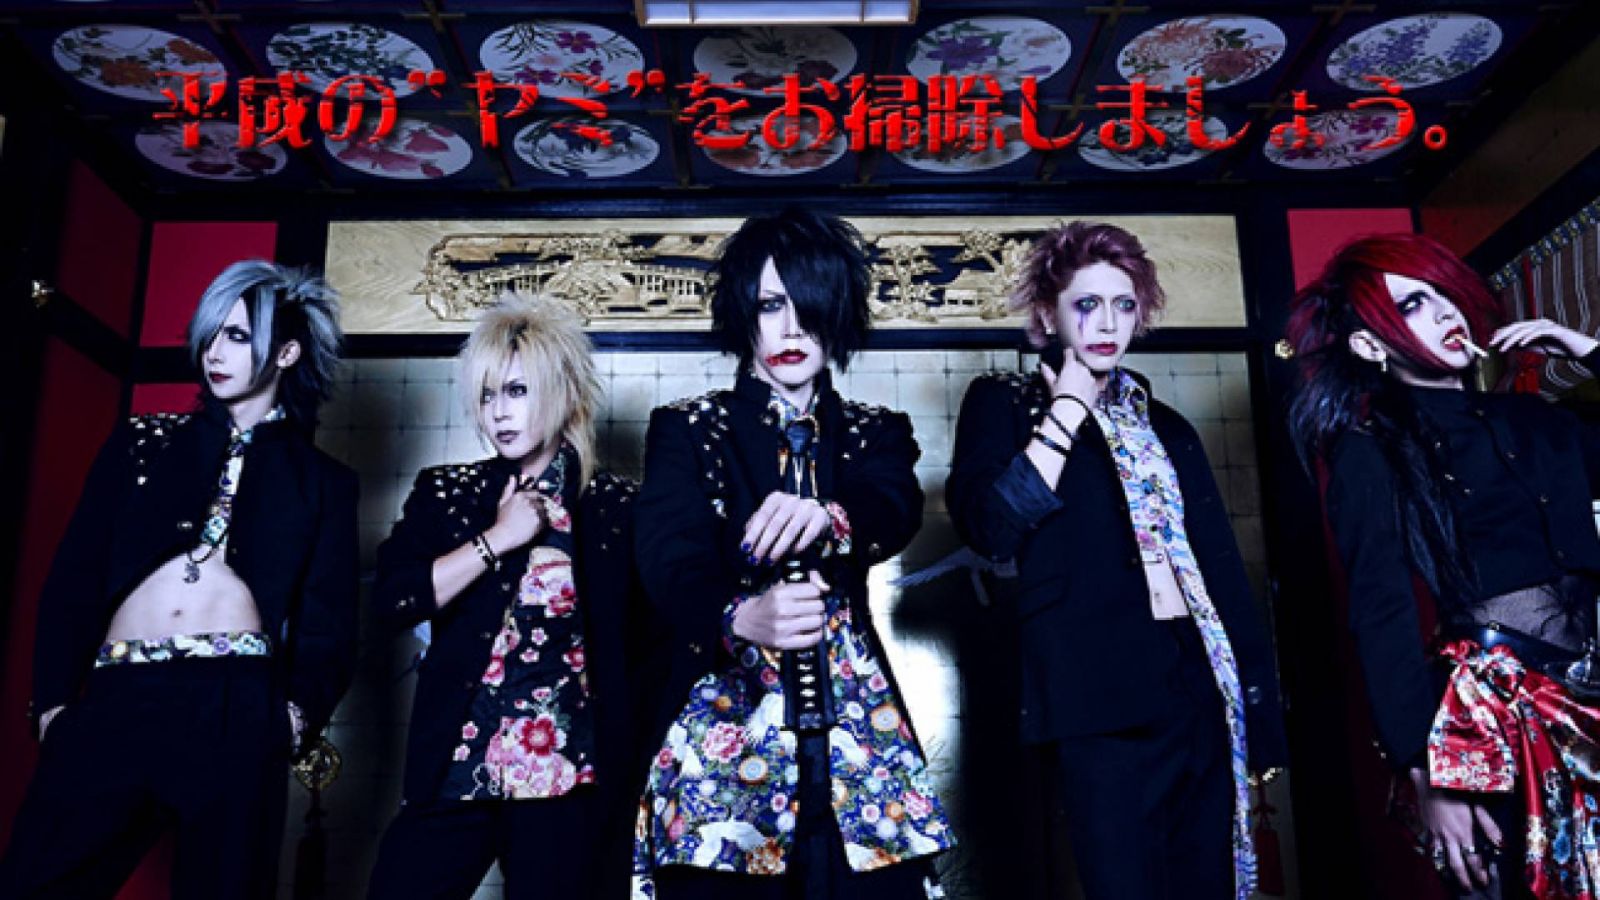 MeteoroiD to Disband © MeteoroiD. All rights reserved.